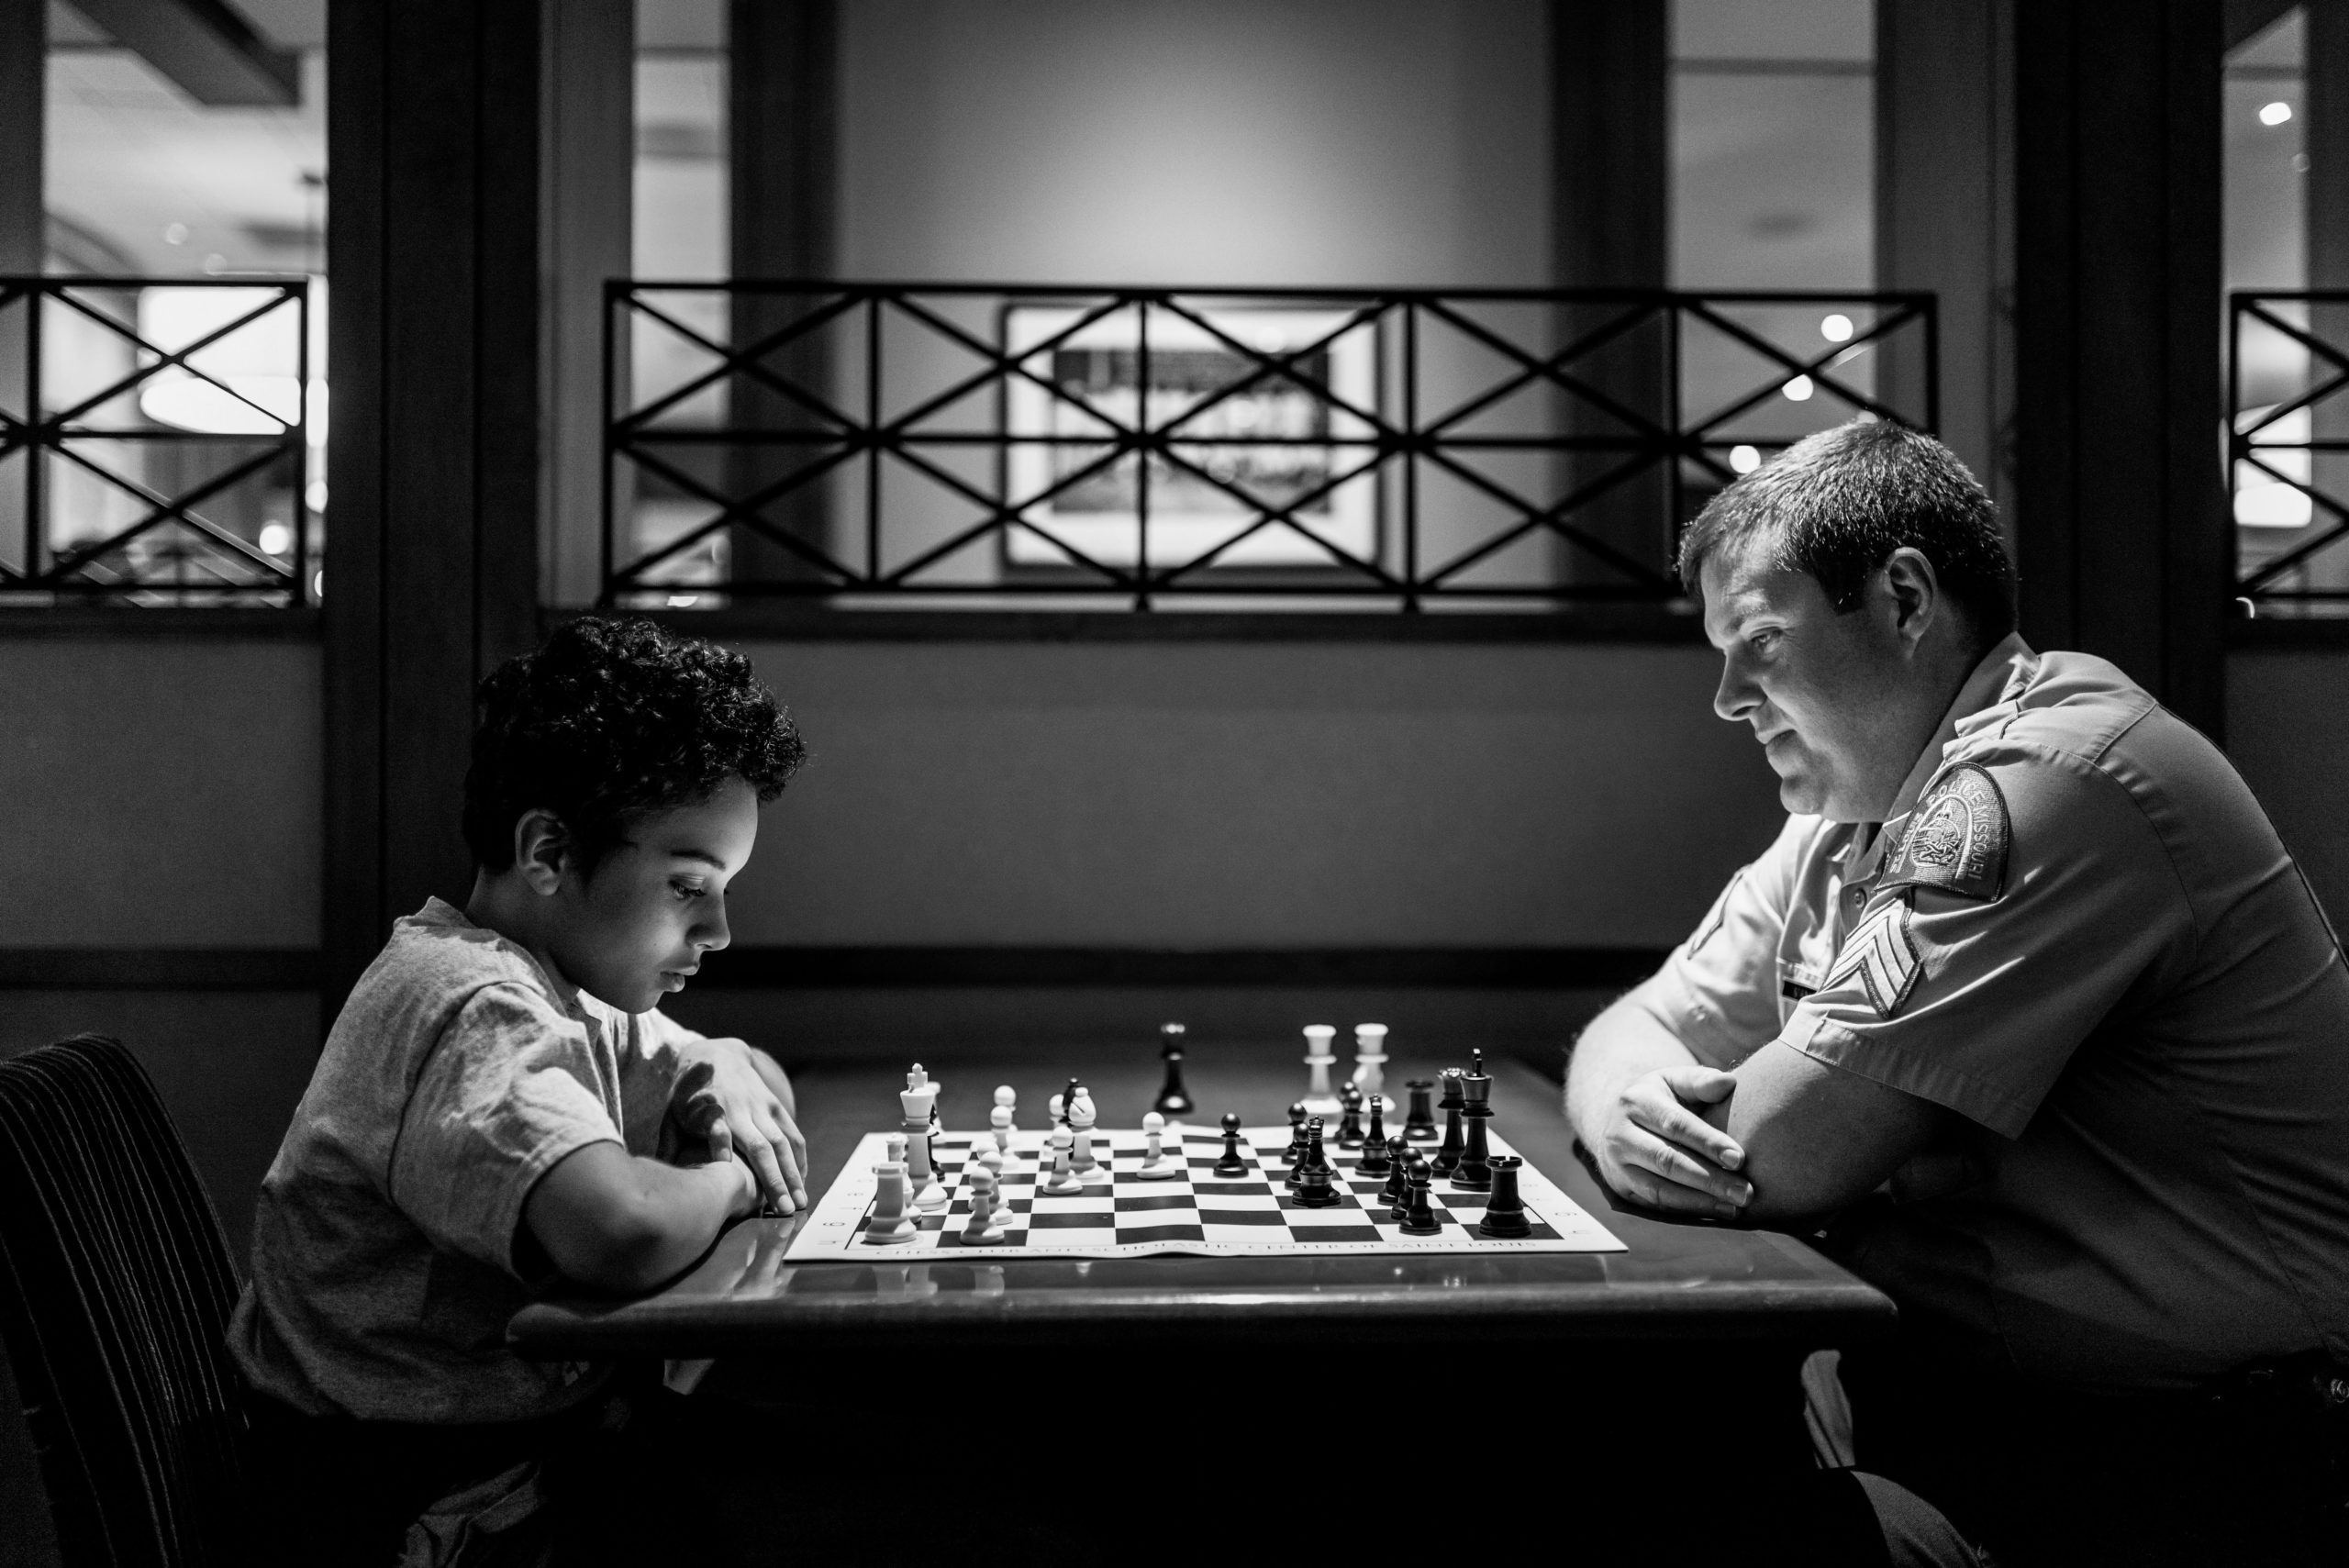 FIDE Candidates: Round 7 Annotations by GM Jacob Aagaard